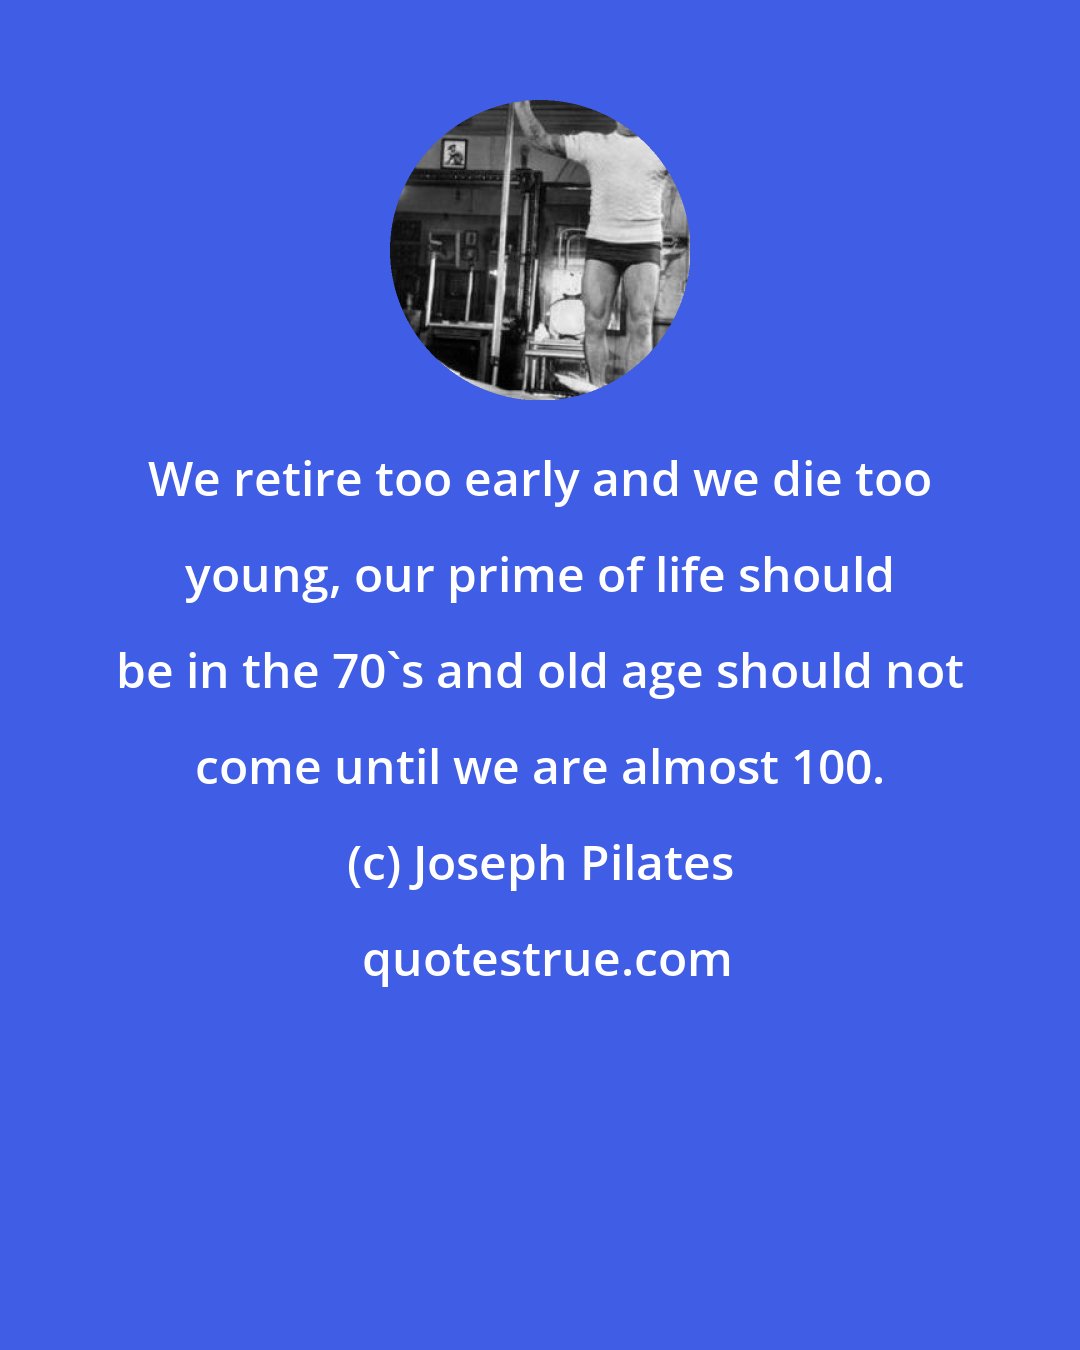 Joseph Pilates: We retire too early and we die too young, our prime of life should be in the 70's and old age should not come until we are almost 100.